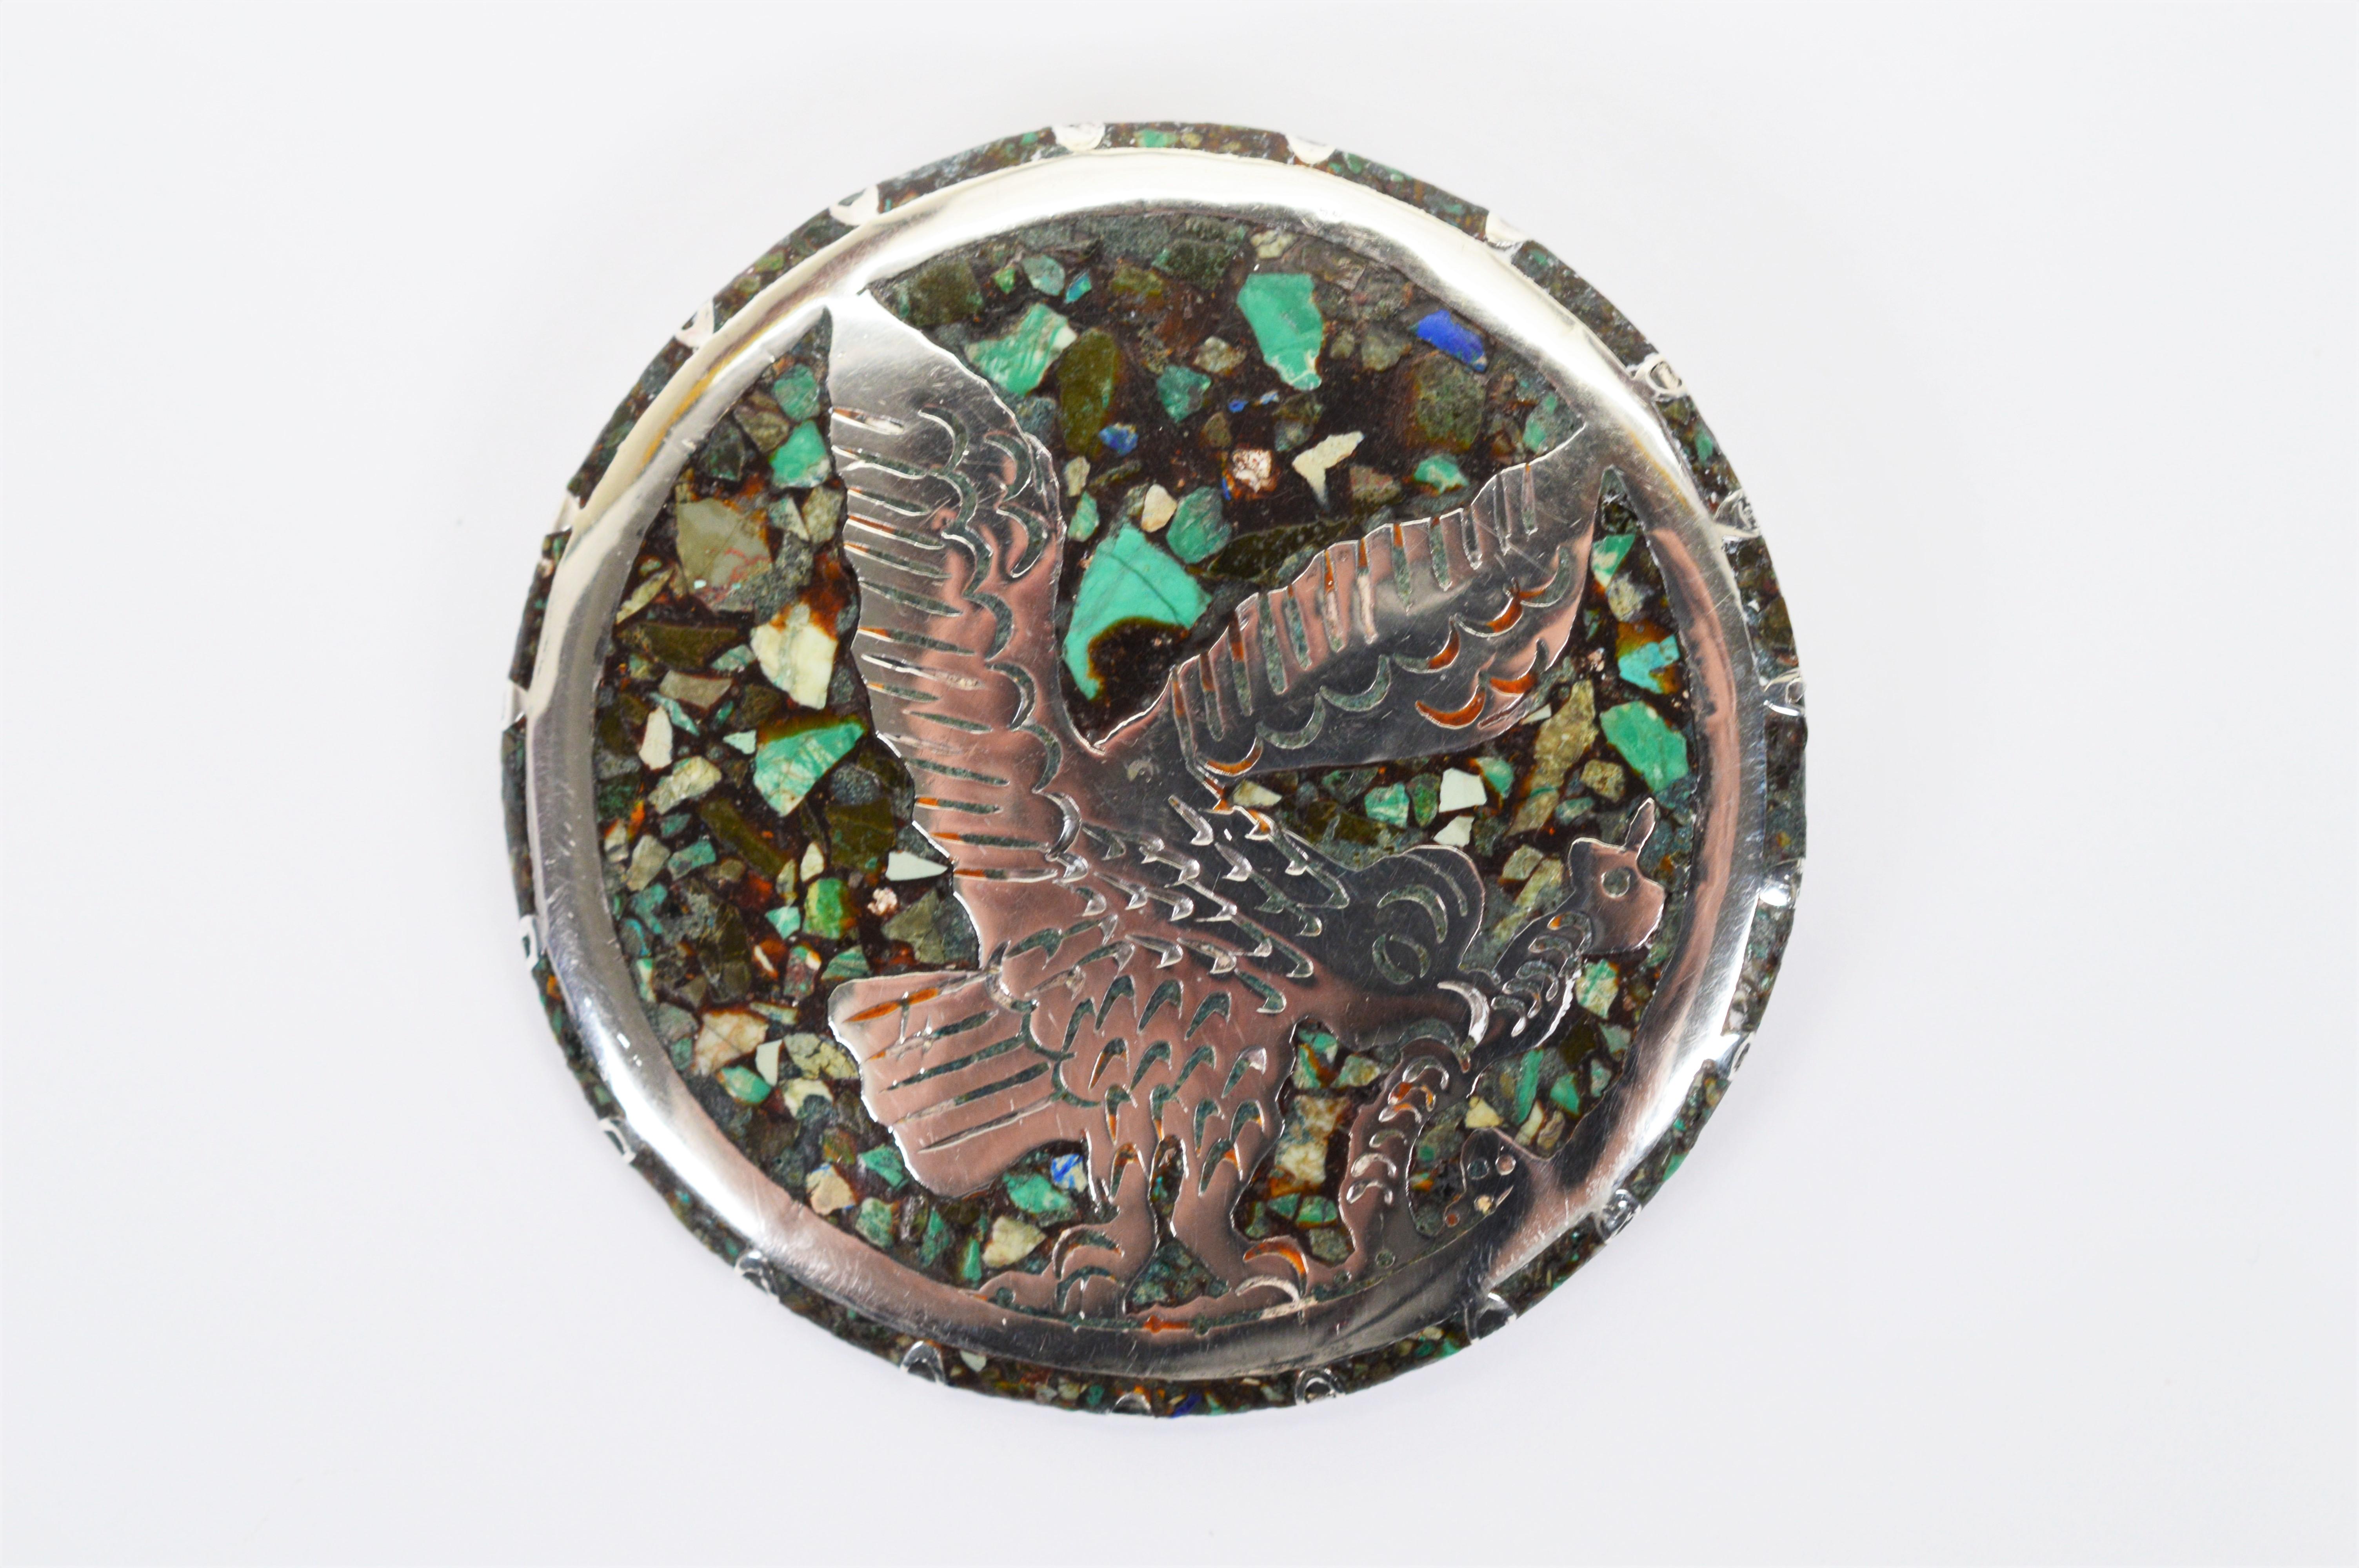 A colorful mosaic of natural stone inlay encircles a bird of prey on this earthy sterling silver brooch. Round, measuring 2-1/4 inch in diameter, this interesting hand hammered artisan piece from Mexico is fitted with a pin to wear as a brooch and a